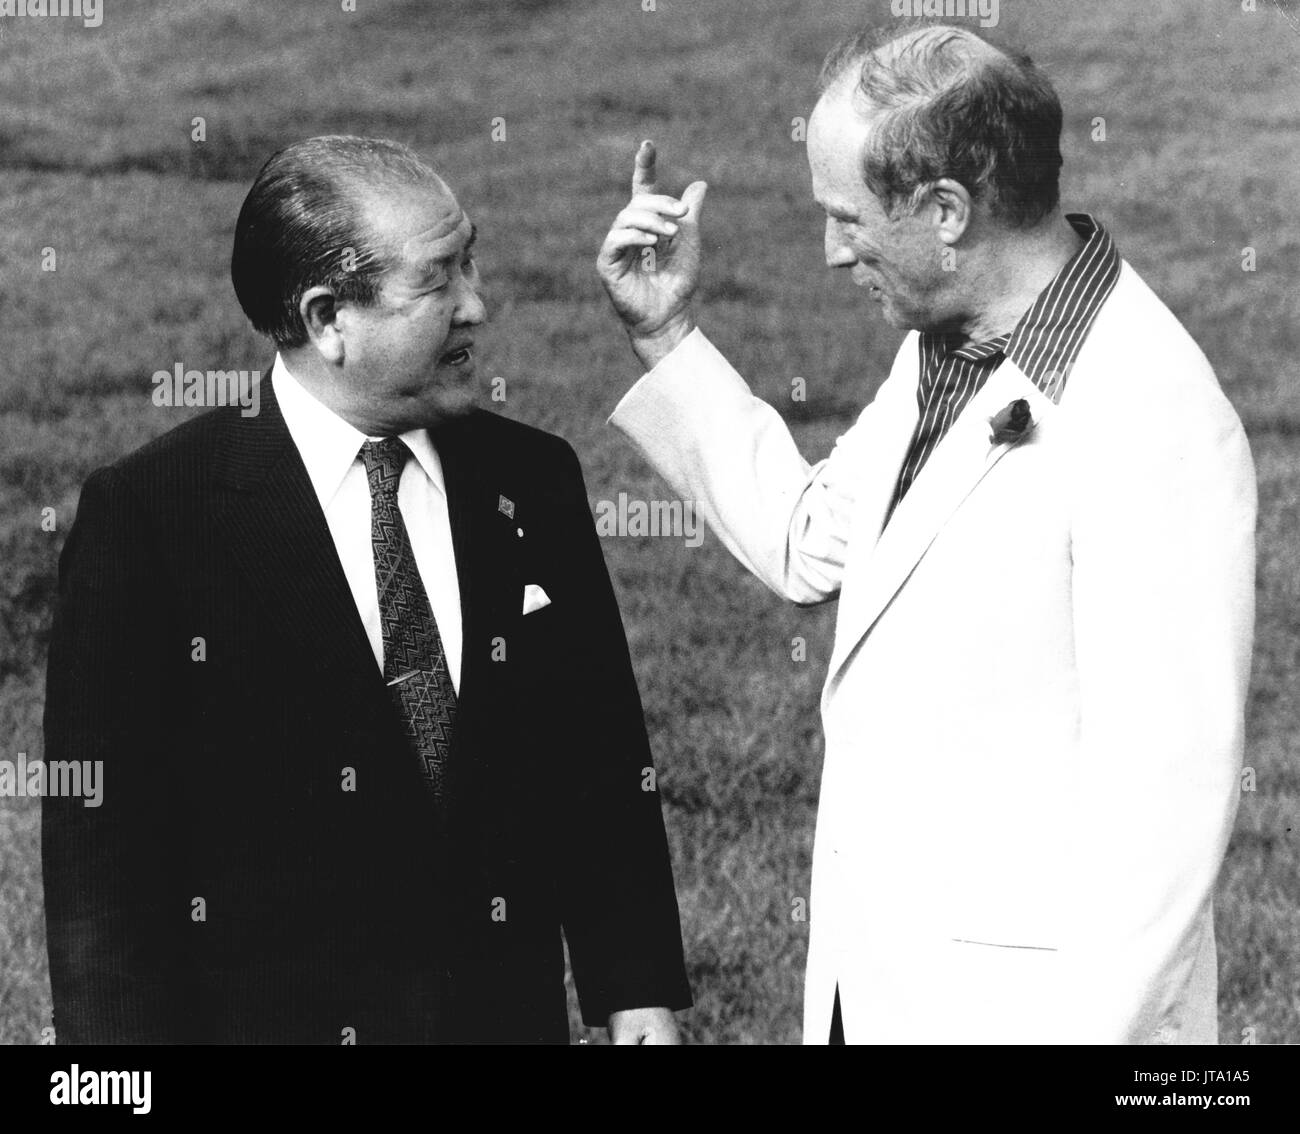 Prime Minister Zenko Suzuki of Japan, left, and Prime Minister Pierre Elliott Trudeau, right, meet as part of the Ottawa Summit at the Château Montebello in Quebec, Canada on July 20, 1981.  Measures are being suggested to restrain imports of Japanese cars to the United States.  European leaders are wary of US interest rates and other US monetary policies.  Credit: Arnie Sachs / CNP /MediaPunch Stock Photo